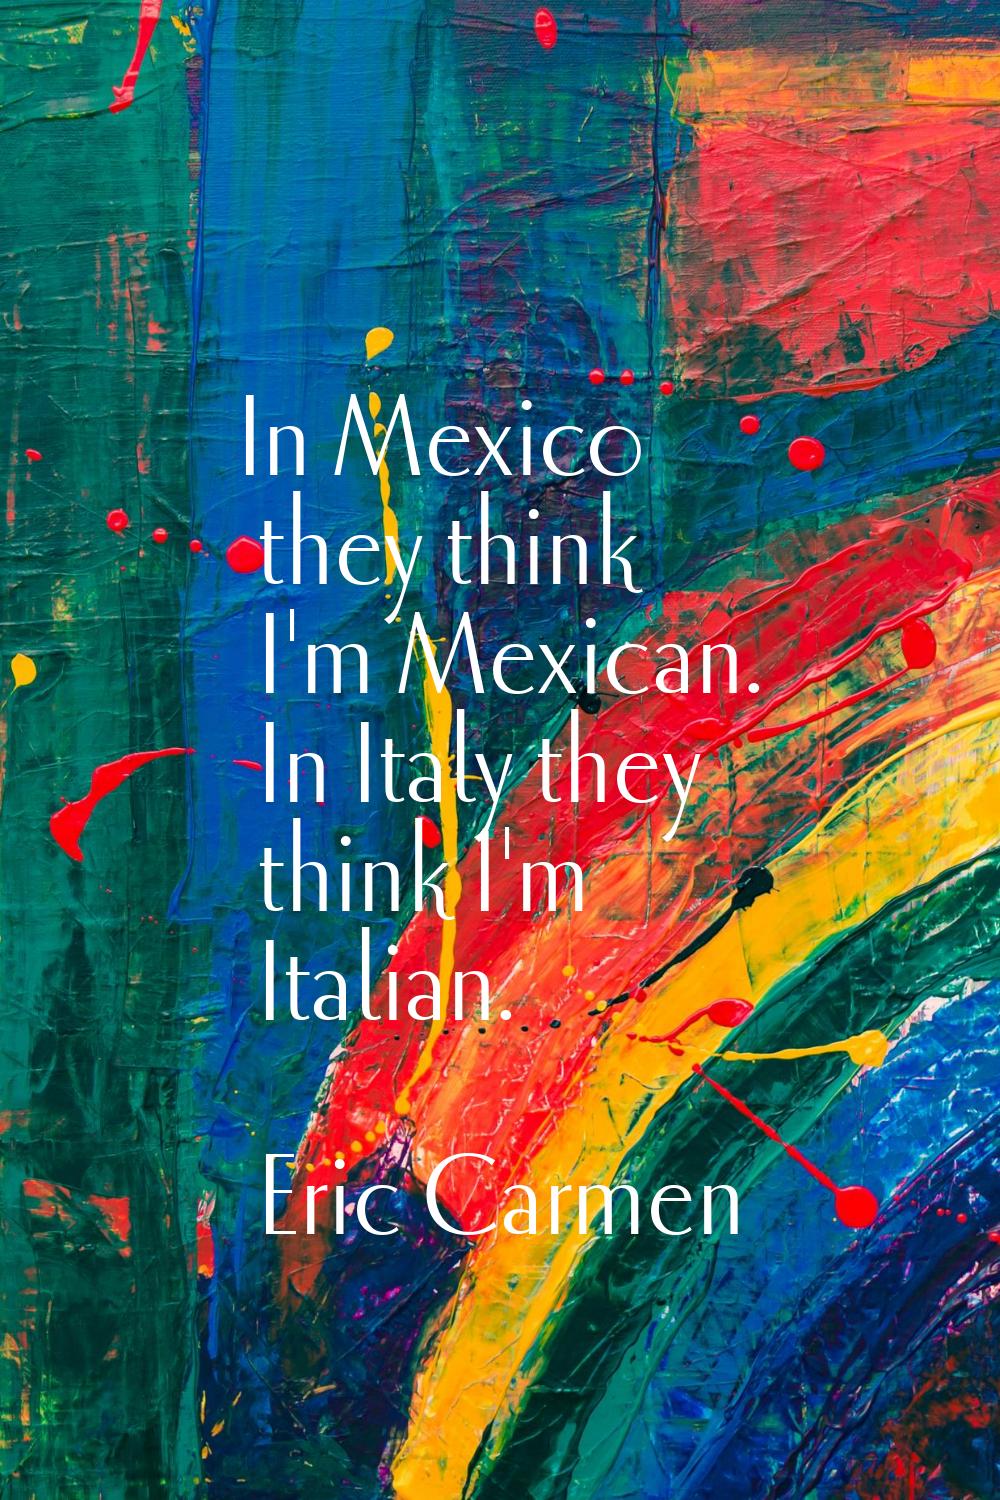 In Mexico they think I'm Mexican. In Italy they think I'm Italian.